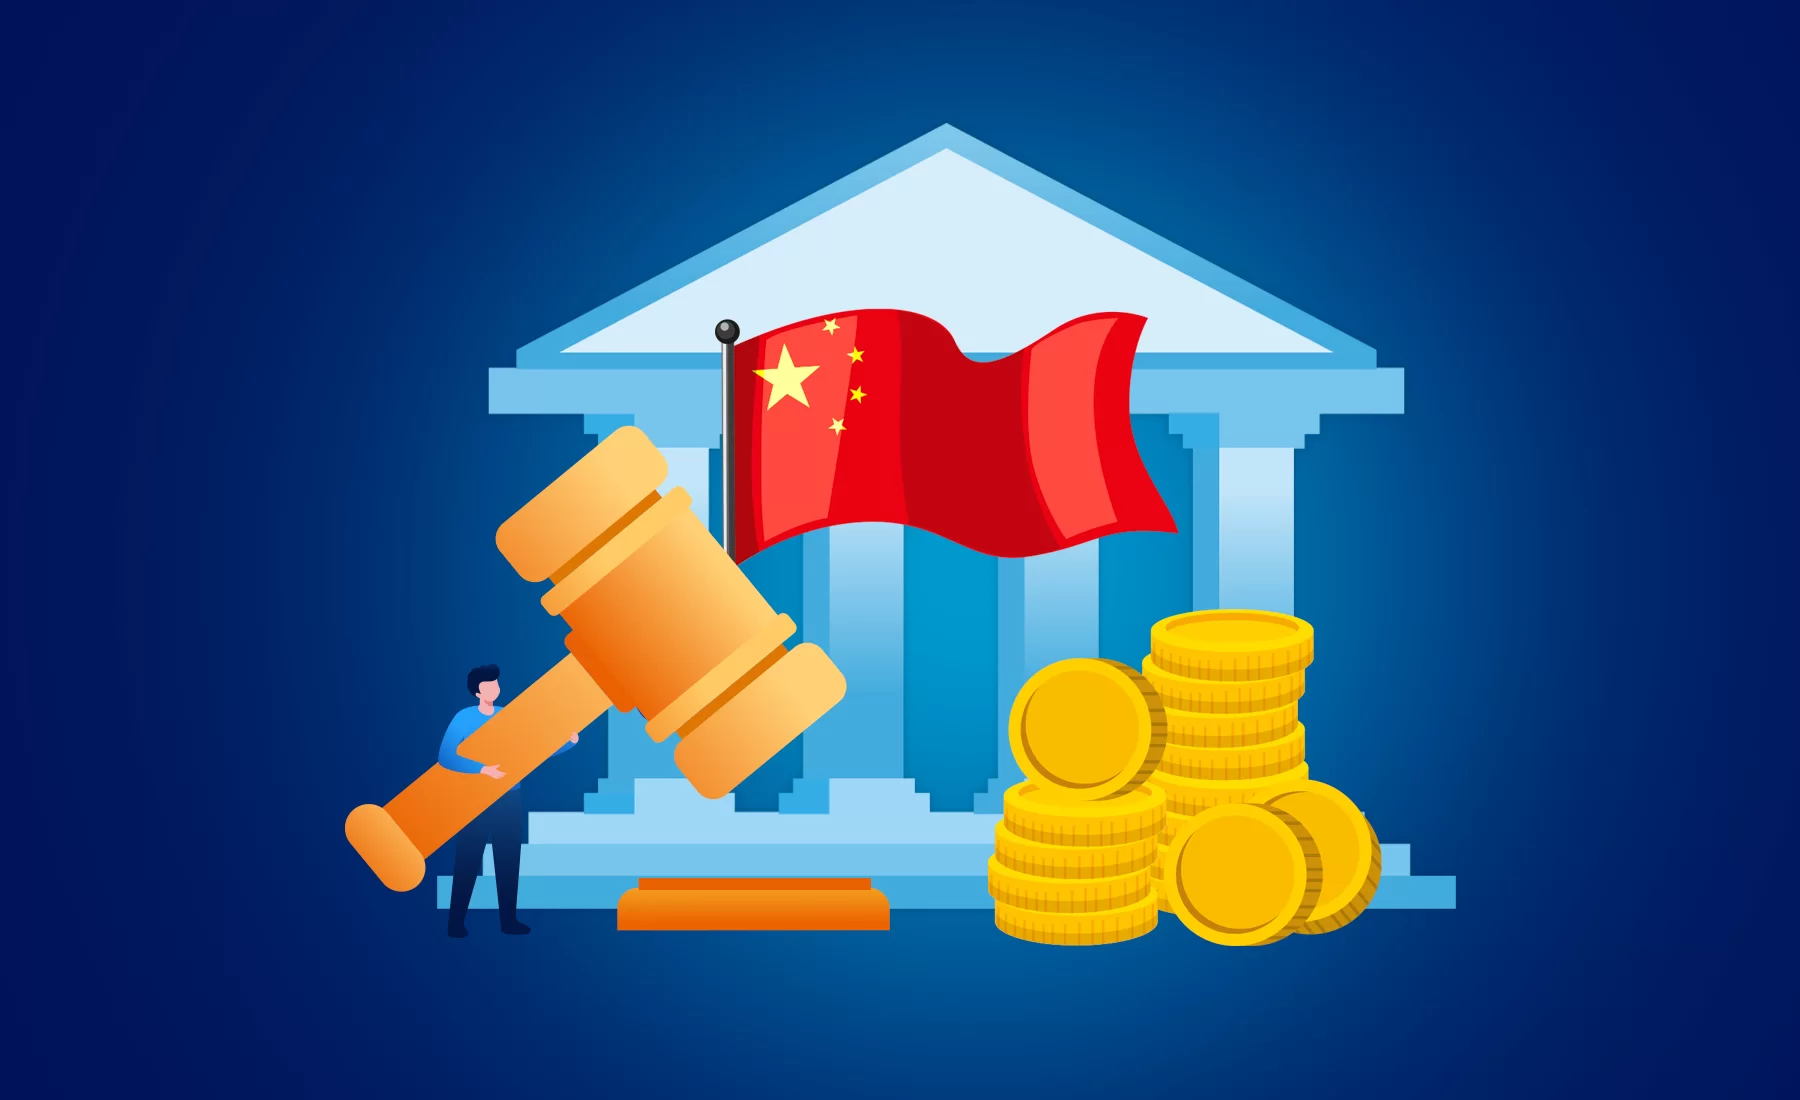 Supreme court of China rules out crypto transactions as illegal